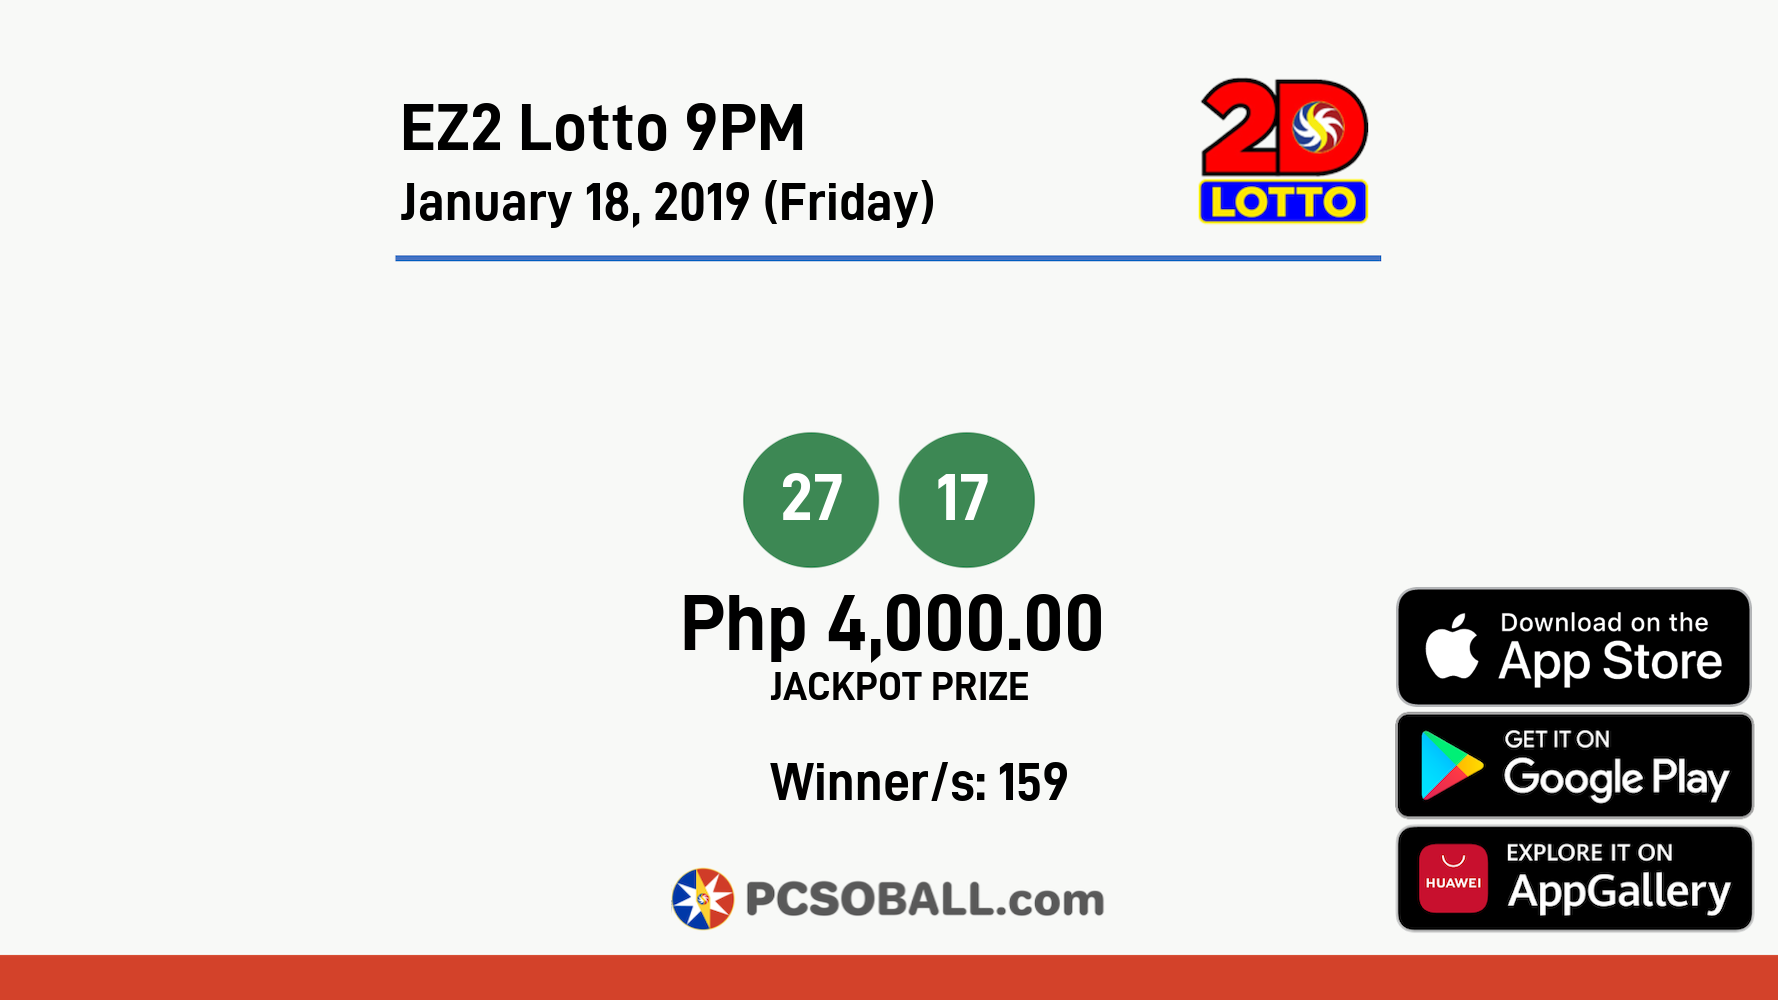 EZ2 Lotto 9PM January 18, 2019 (Friday) Result